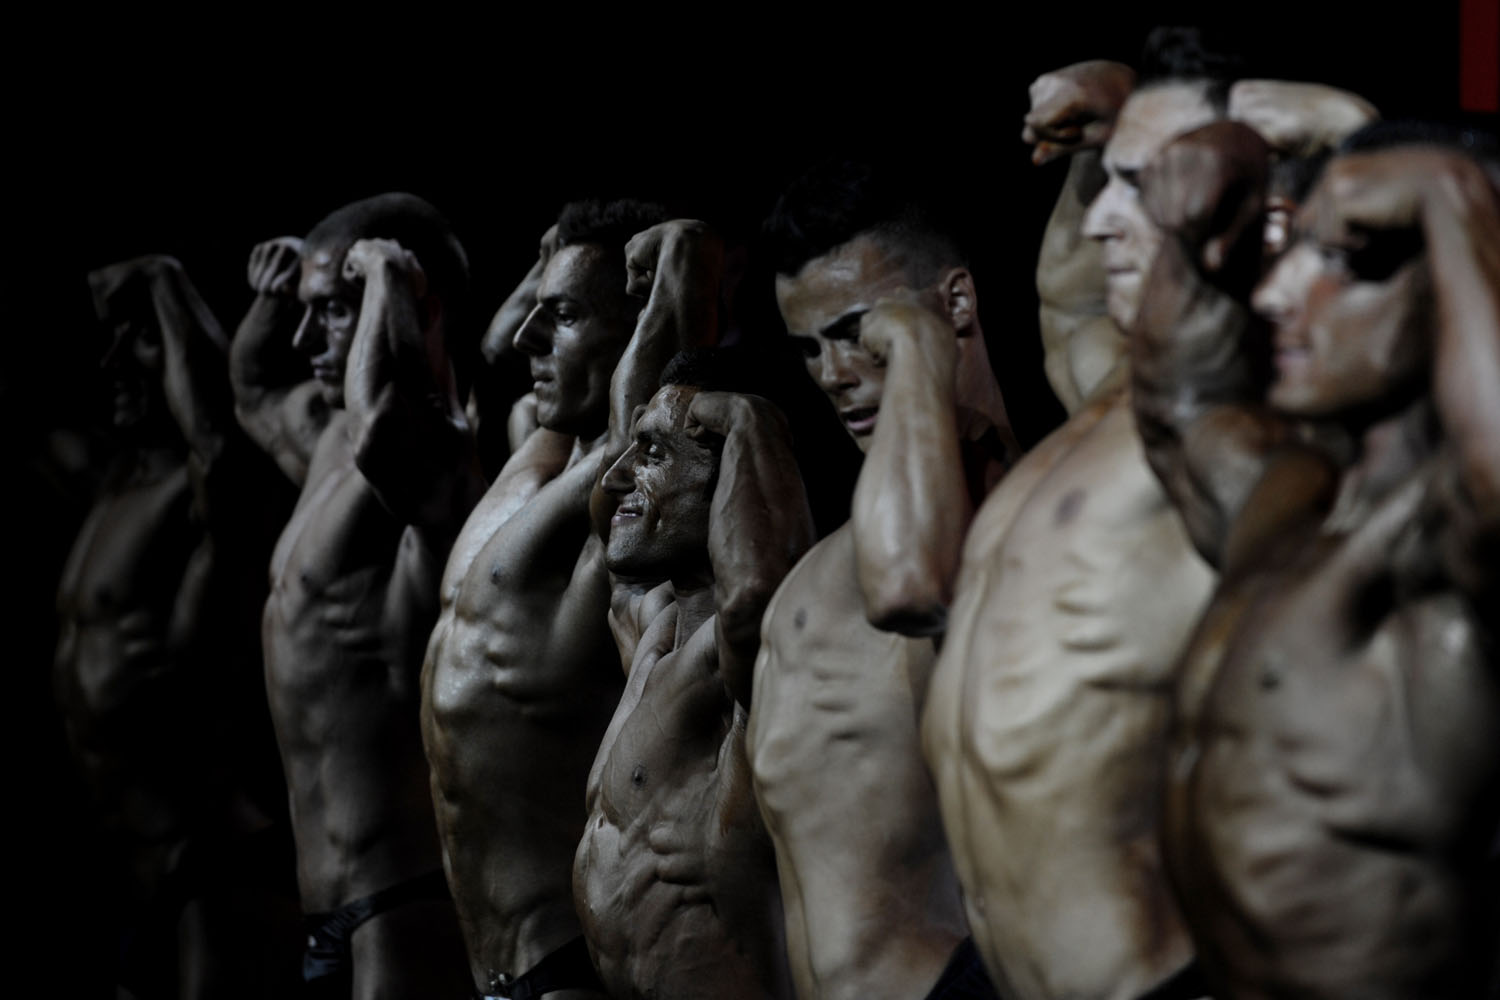 Oct. 6, 2012. Bodybuilders flex their muscles on stage during the Kosovo national bodybuilding championship in Pristina.